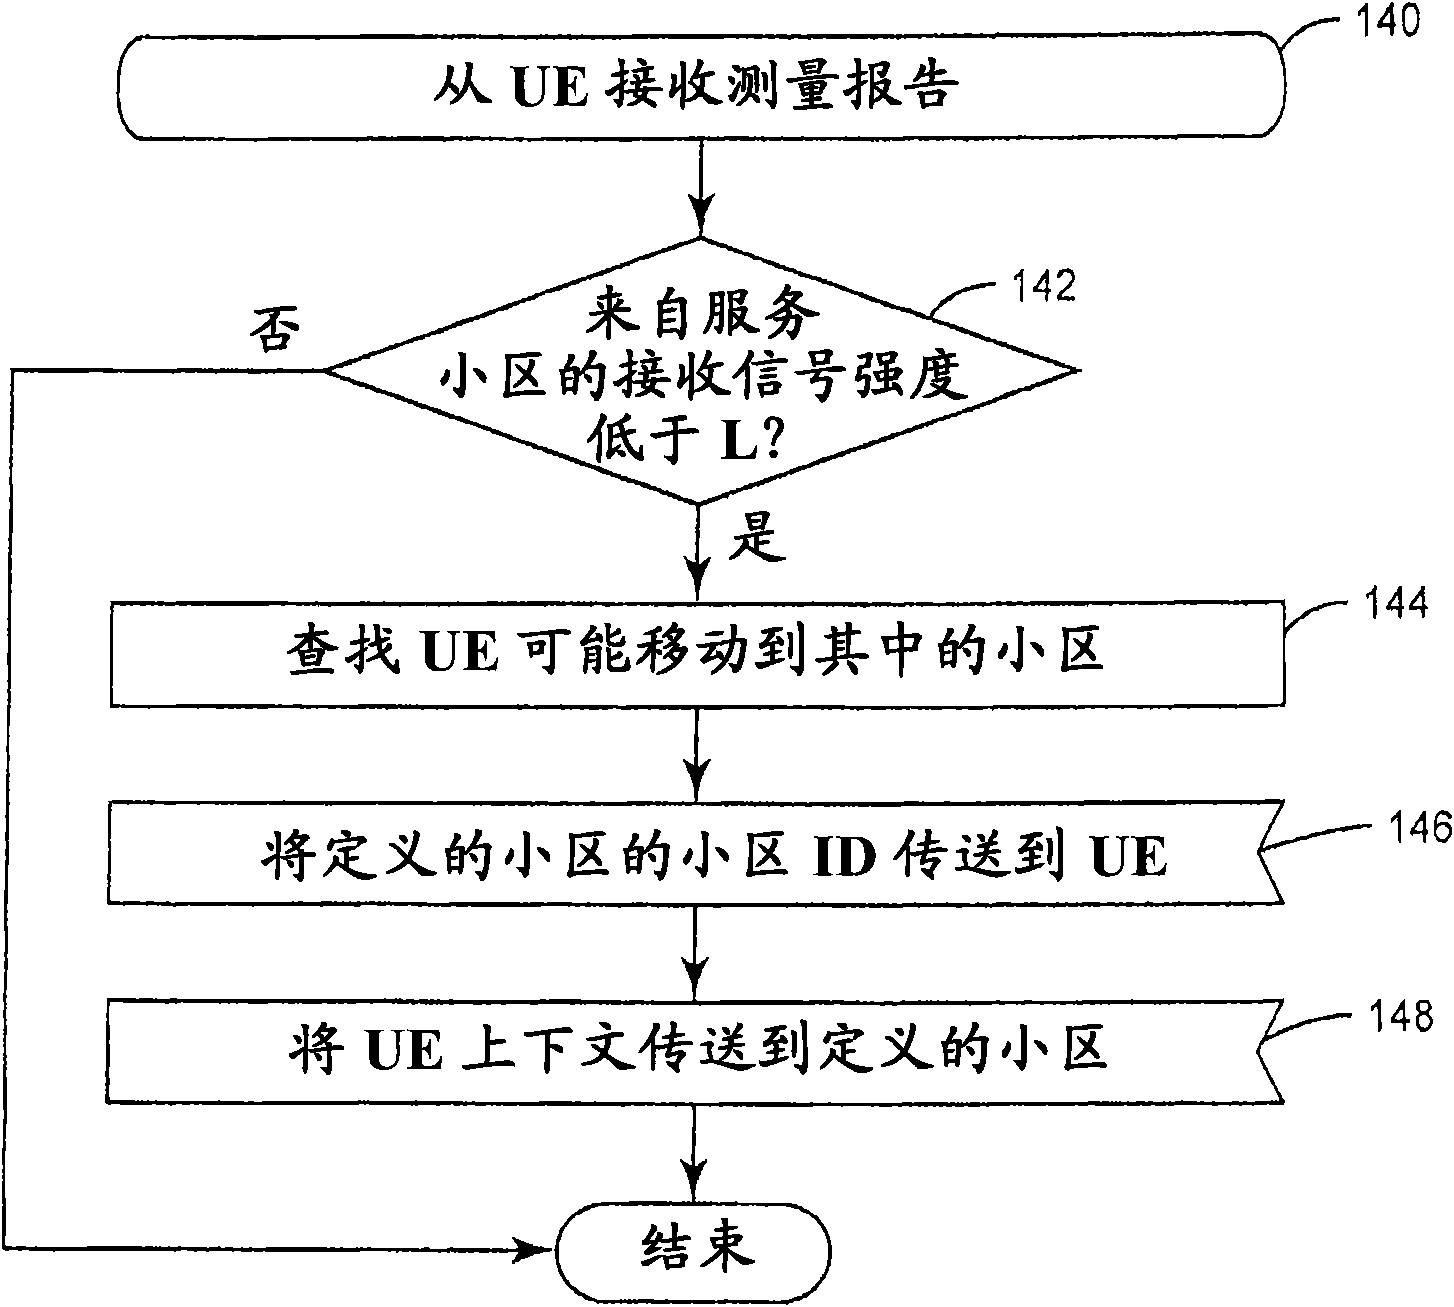 Method and apparatus for radio link failure recovery in a telecommunication system